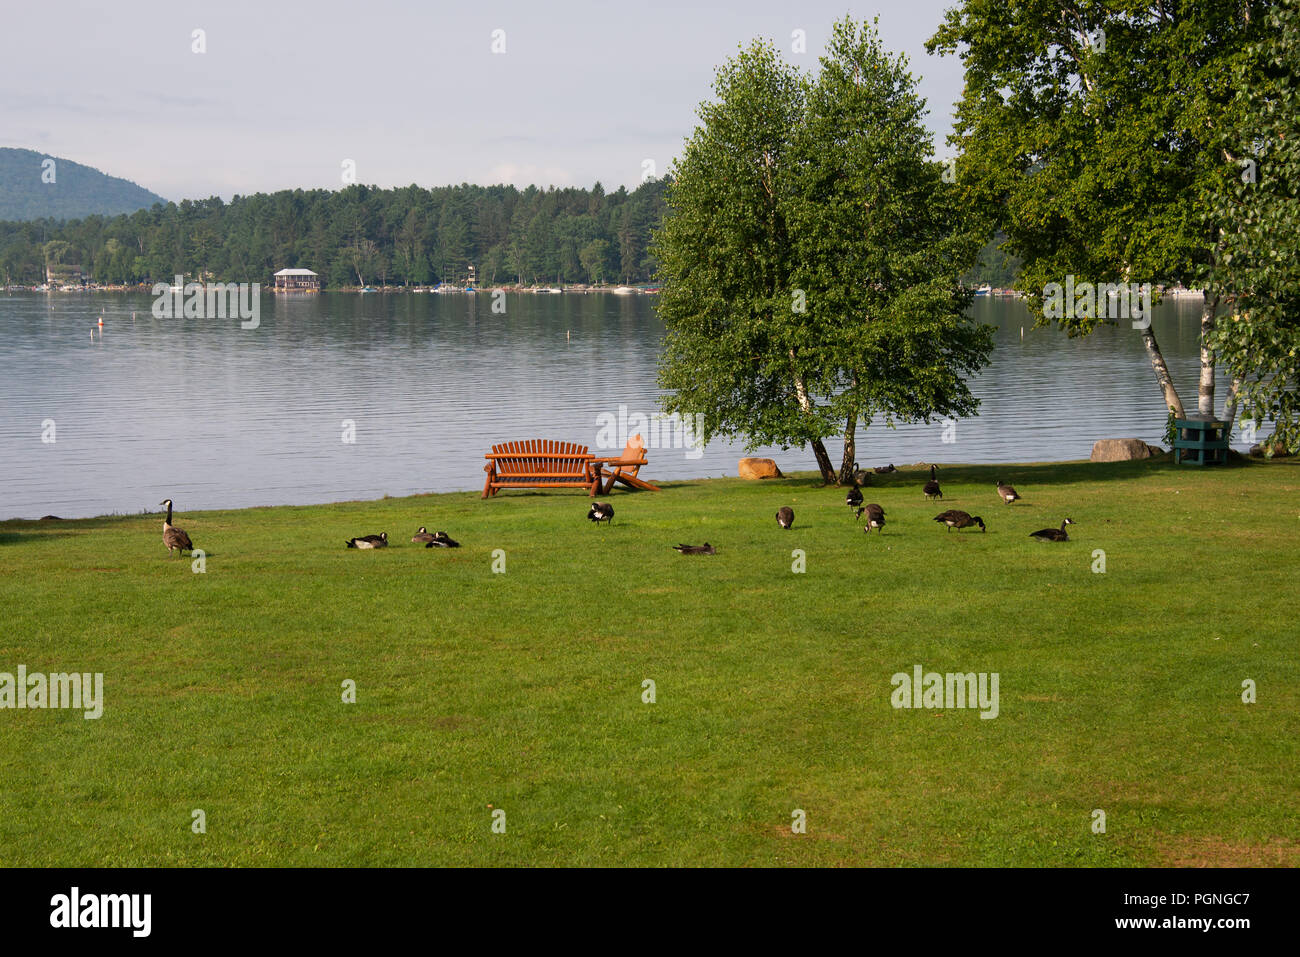 A small flock of Canada geese, Branta canadensis, resting and feeding on the lawn on Osborne Point in Speculator, NY USA with a view of Lake Pleasant Stock Photo